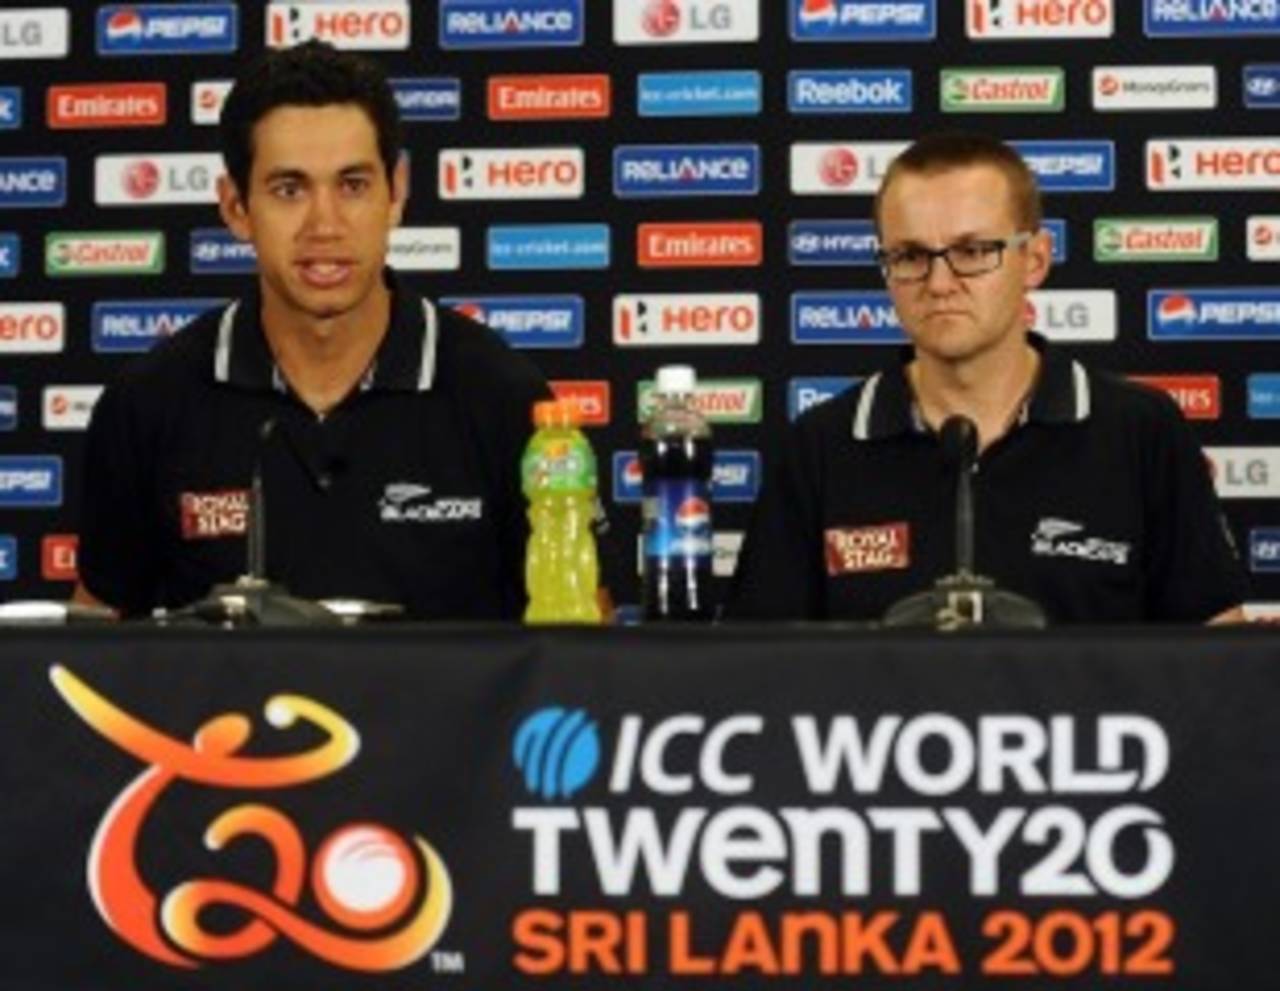 Ross Taylor said his relationship with coach Mike Hesson was "pretty poor"&nbsp;&nbsp;&bull;&nbsp;&nbsp;AFP